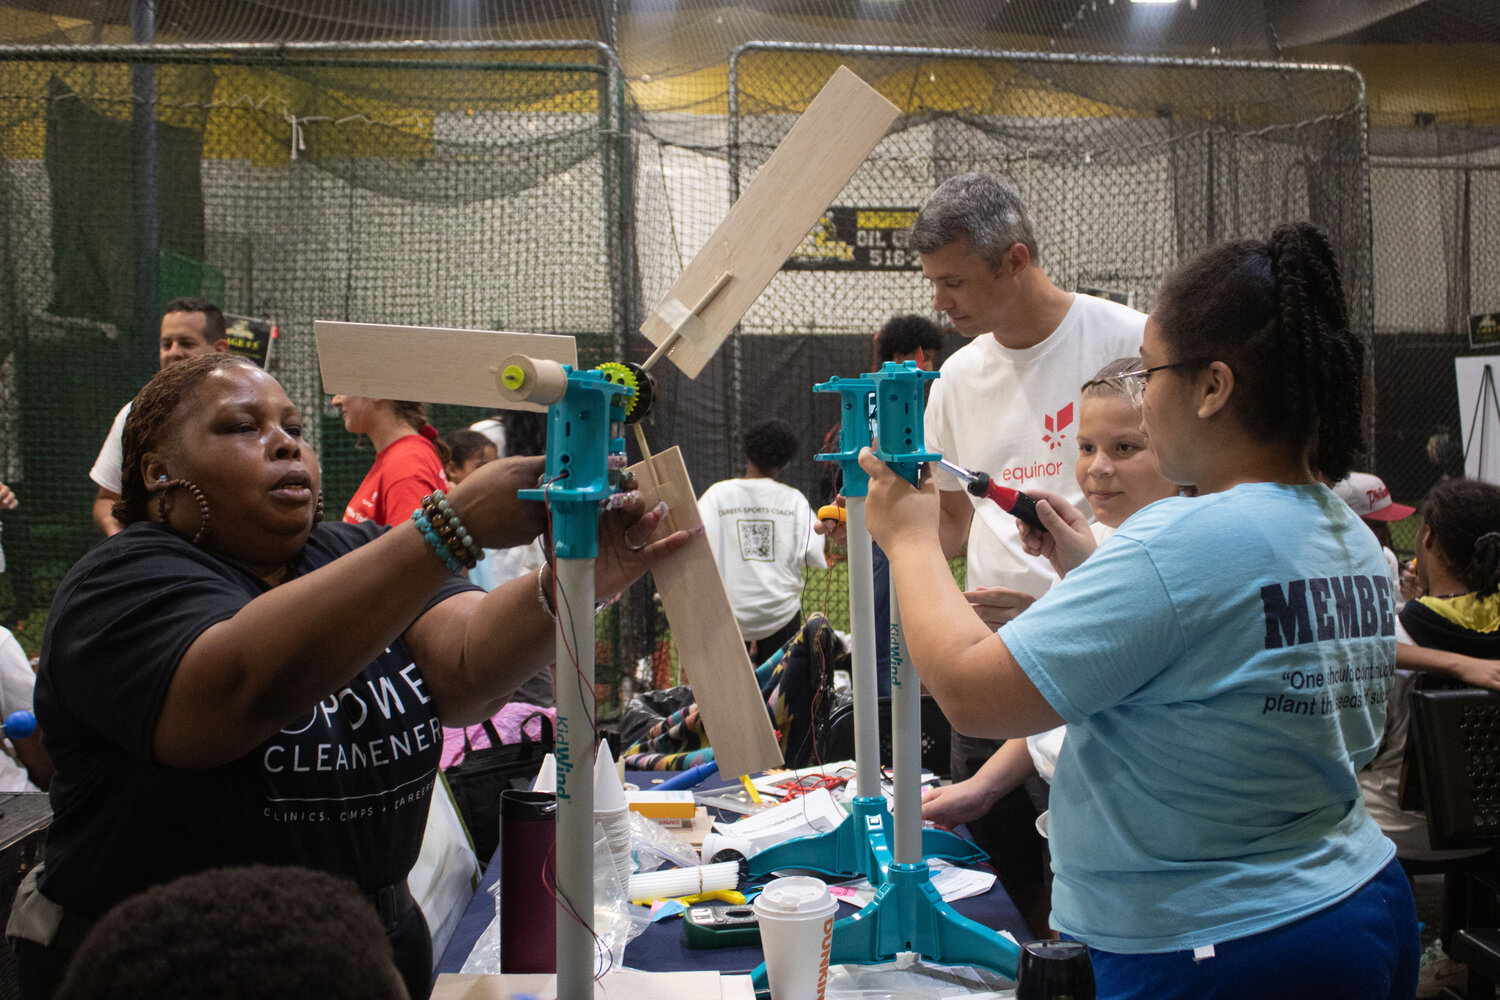 Student-Athletes at the Sports Power Clean Energy clinic in Oceanside work with Equinor staff to learn about how offshore wind turbines work and build their own scale model of a turbine.